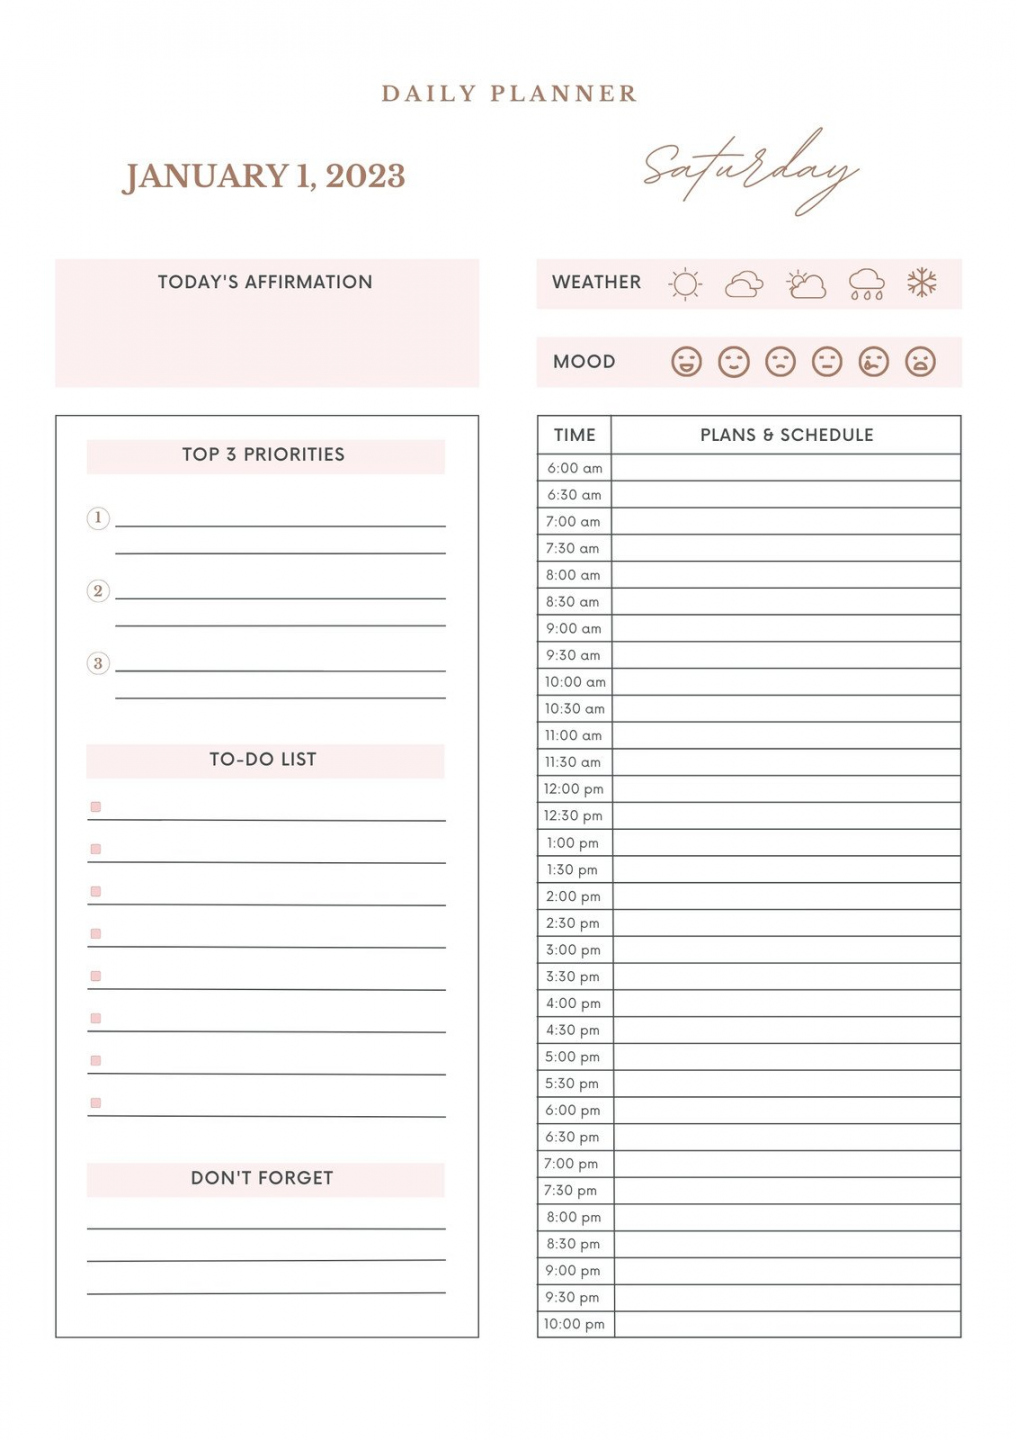 Free Printable Daily Schedule - Printable - Free daily planner templates to customize  Canva